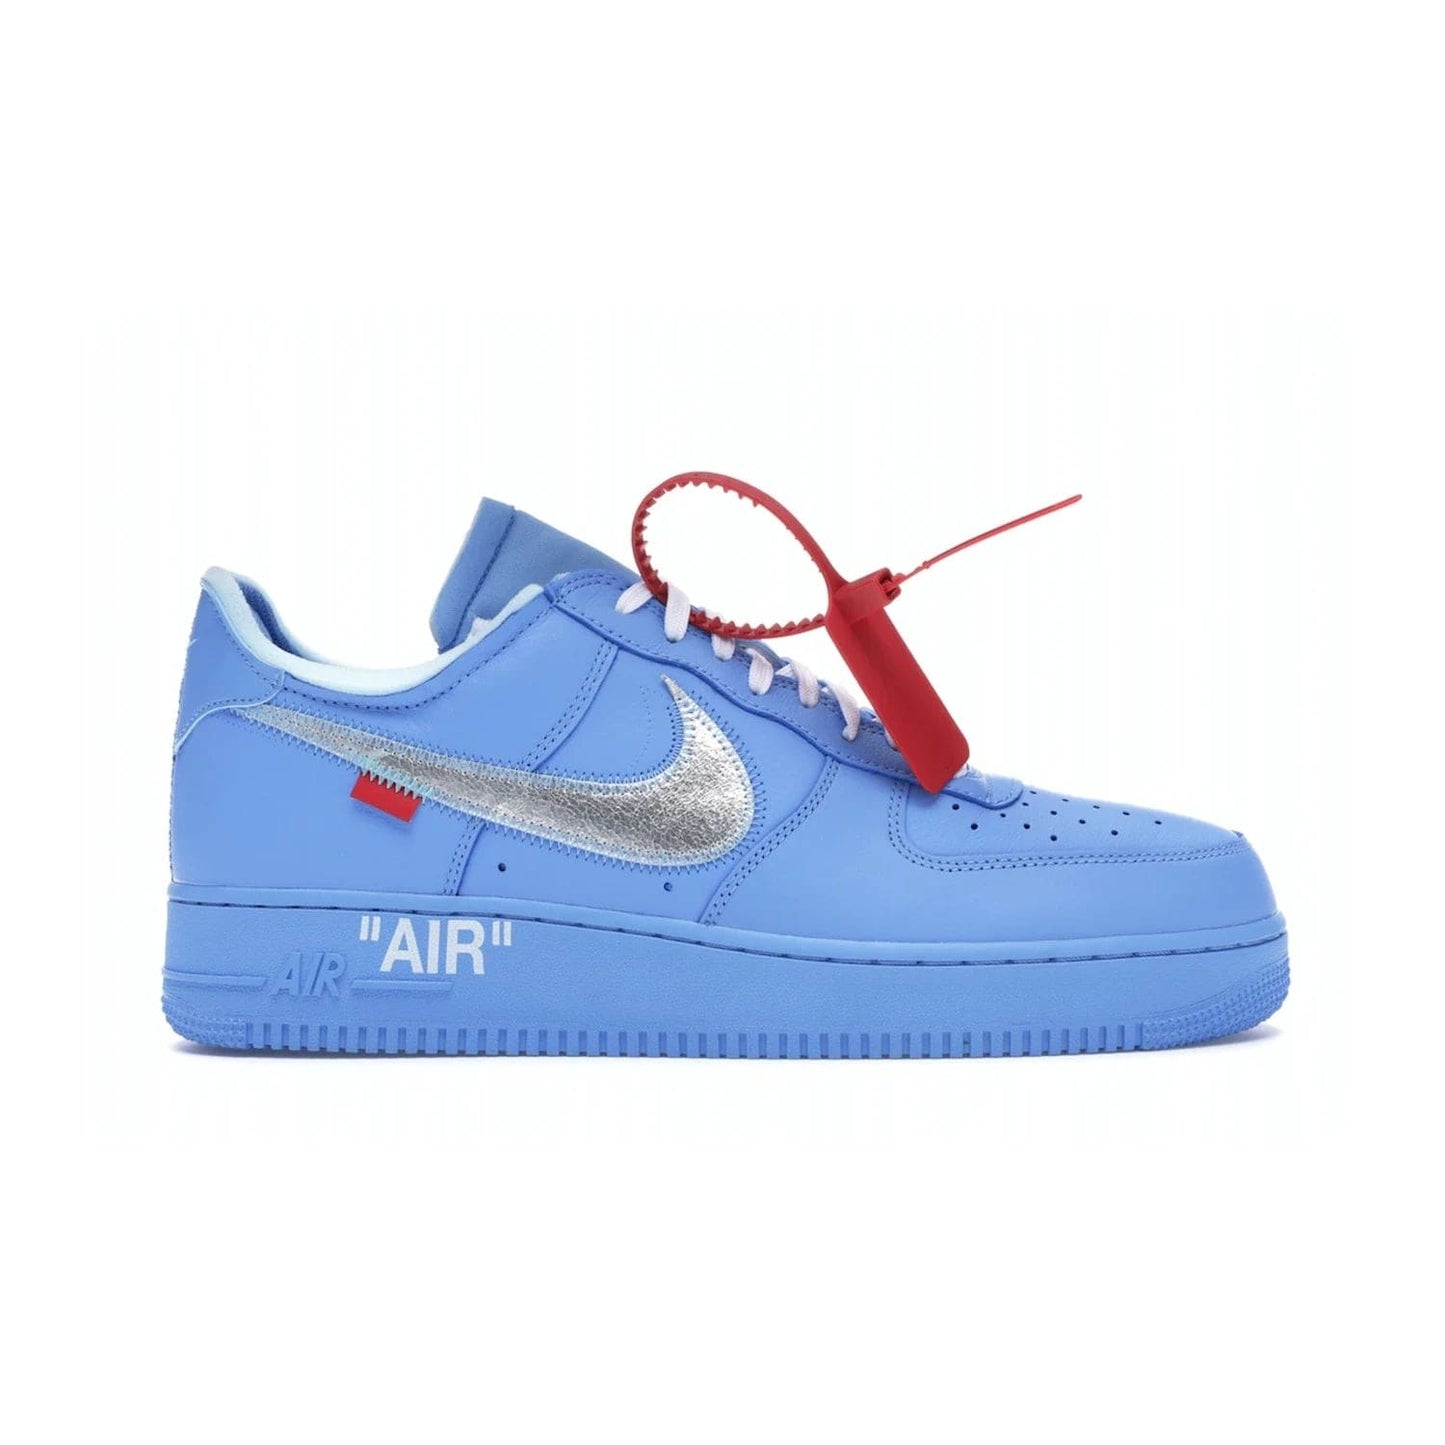 Nike Air Force 1 Low Off-White MCA University Blue - Image 1 - Only at www.BallersClubKickz.com - Virgil Abloh's Air Force 1 Low Off-White MCA University Blue: Features University Blue leather and midsole, reflective silver Nike Swoosh, red zip tie, white laces, and iconic Off-White™ branding. A must-have for any Virgil Abloh enthusiast.